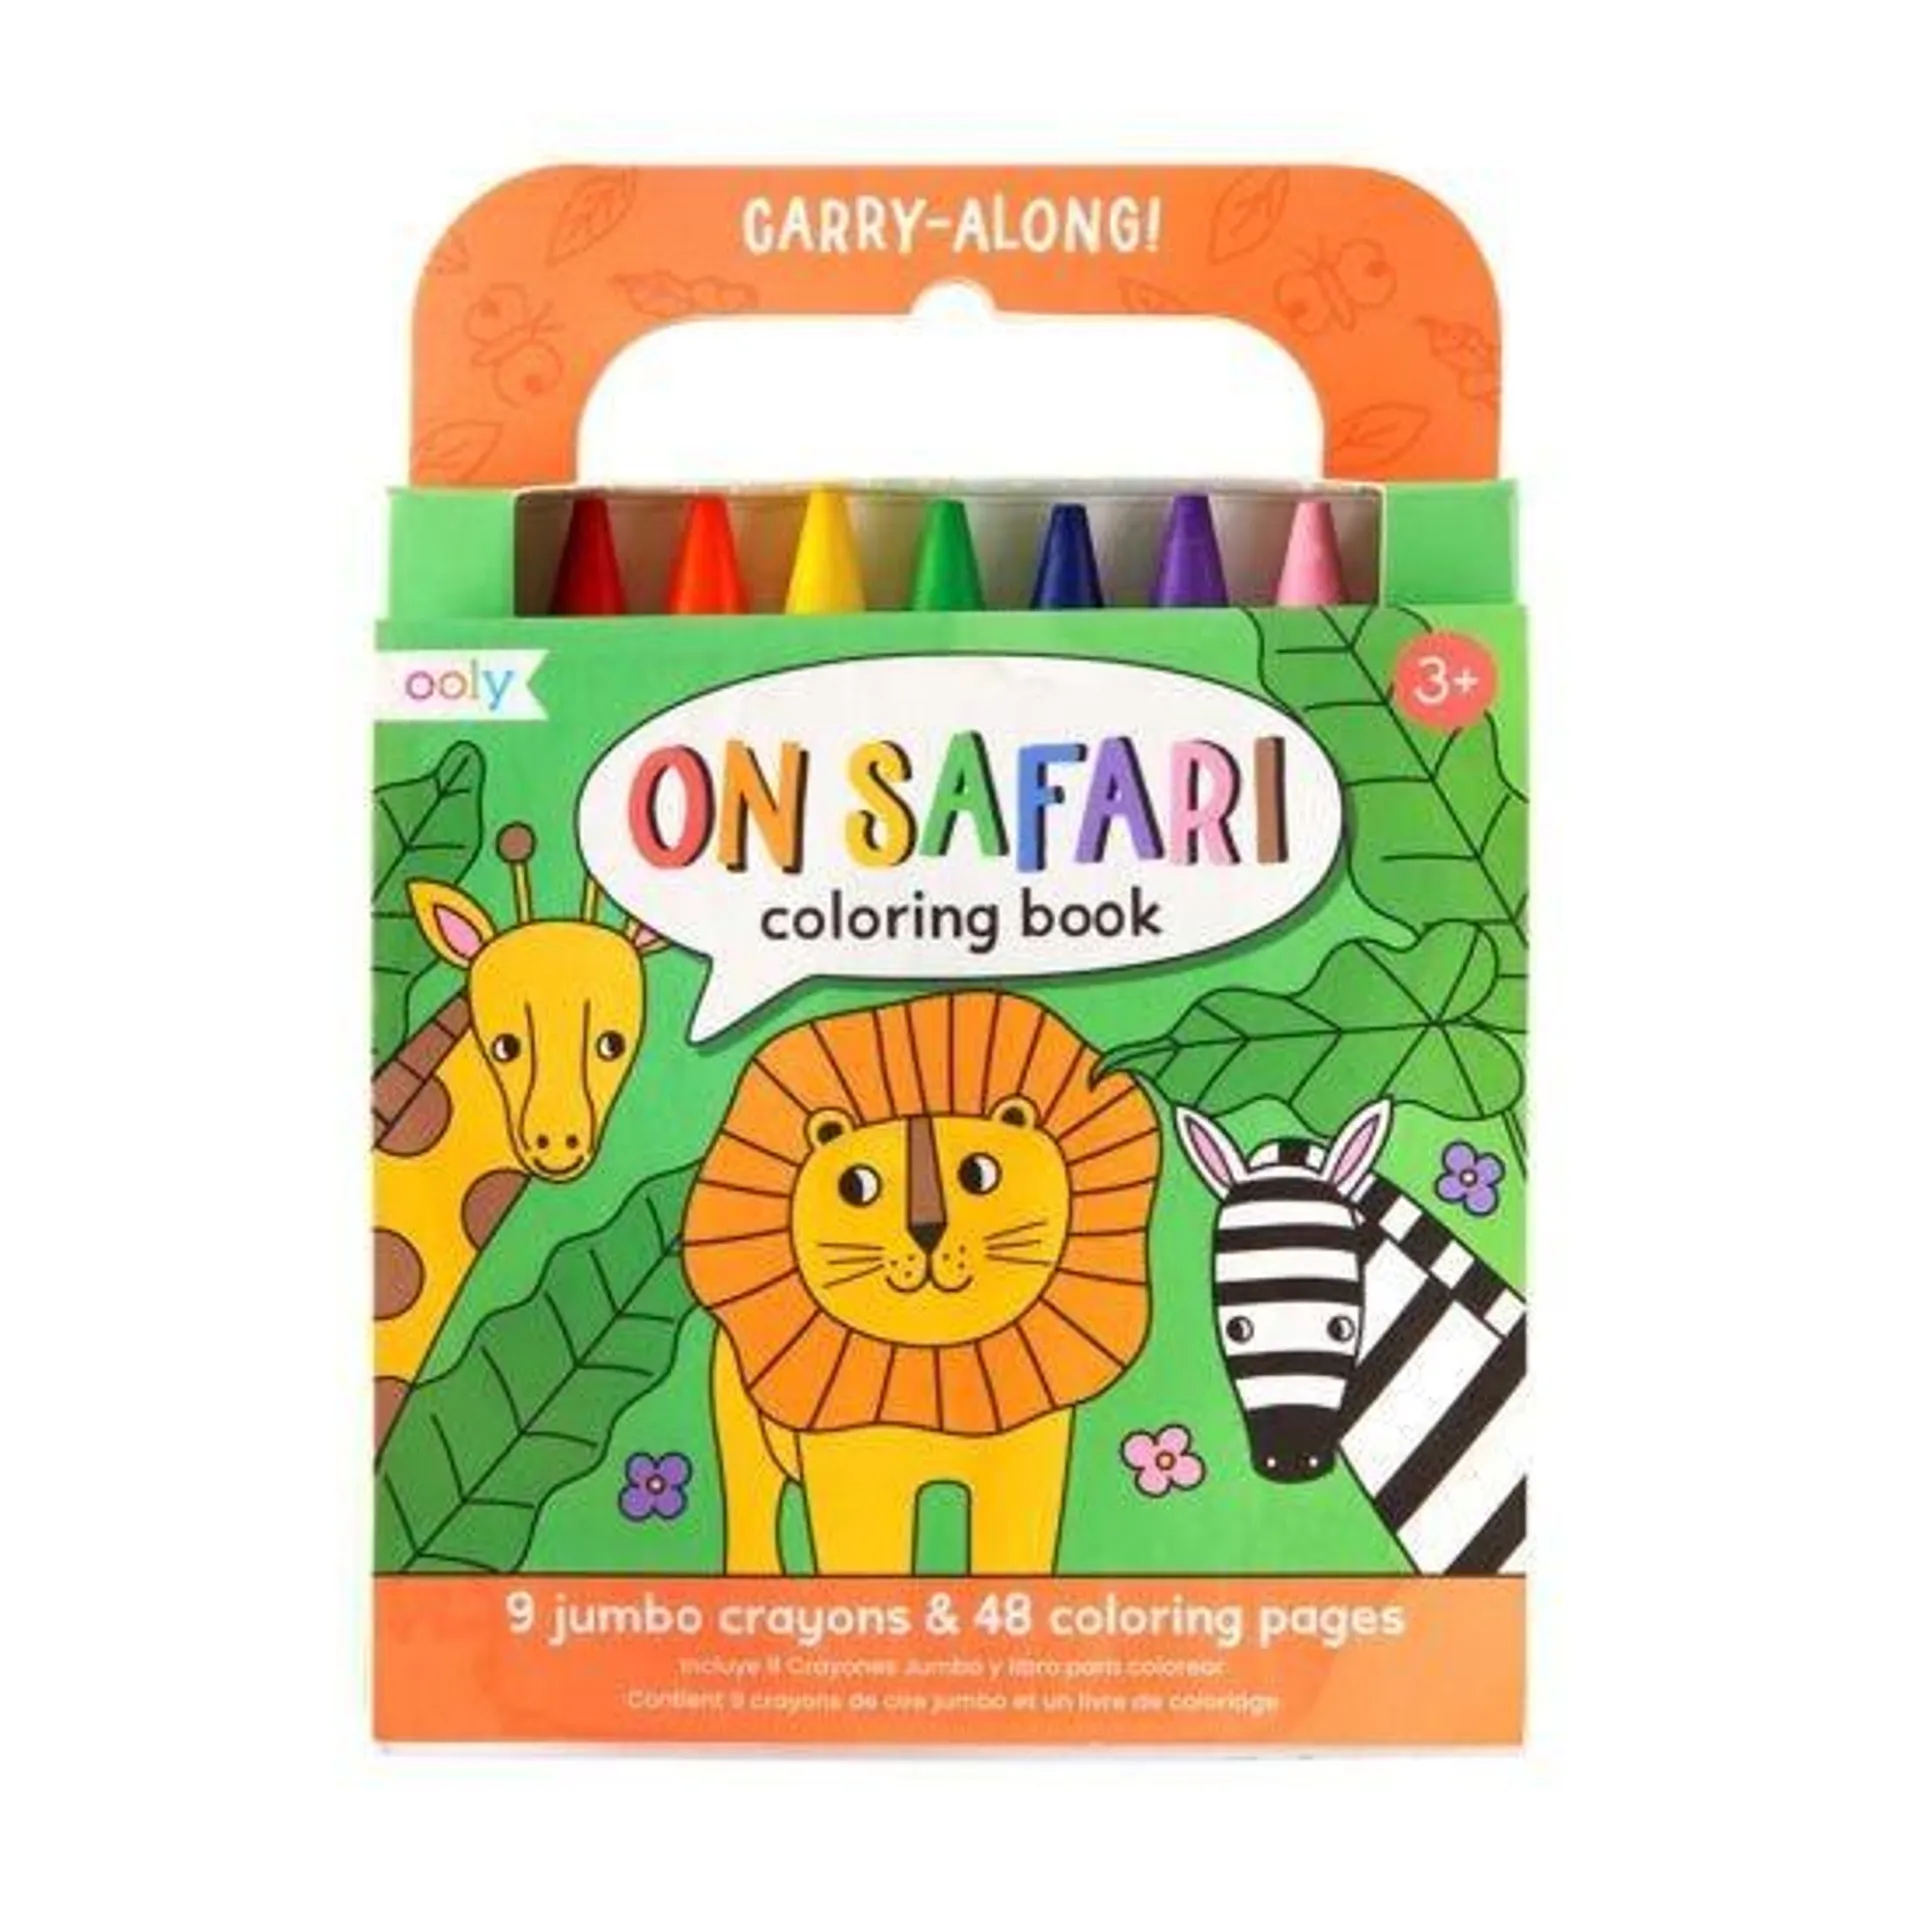 Ooly Carry Along Crayon and Colouring Book Kit-On Safari - Set of 10